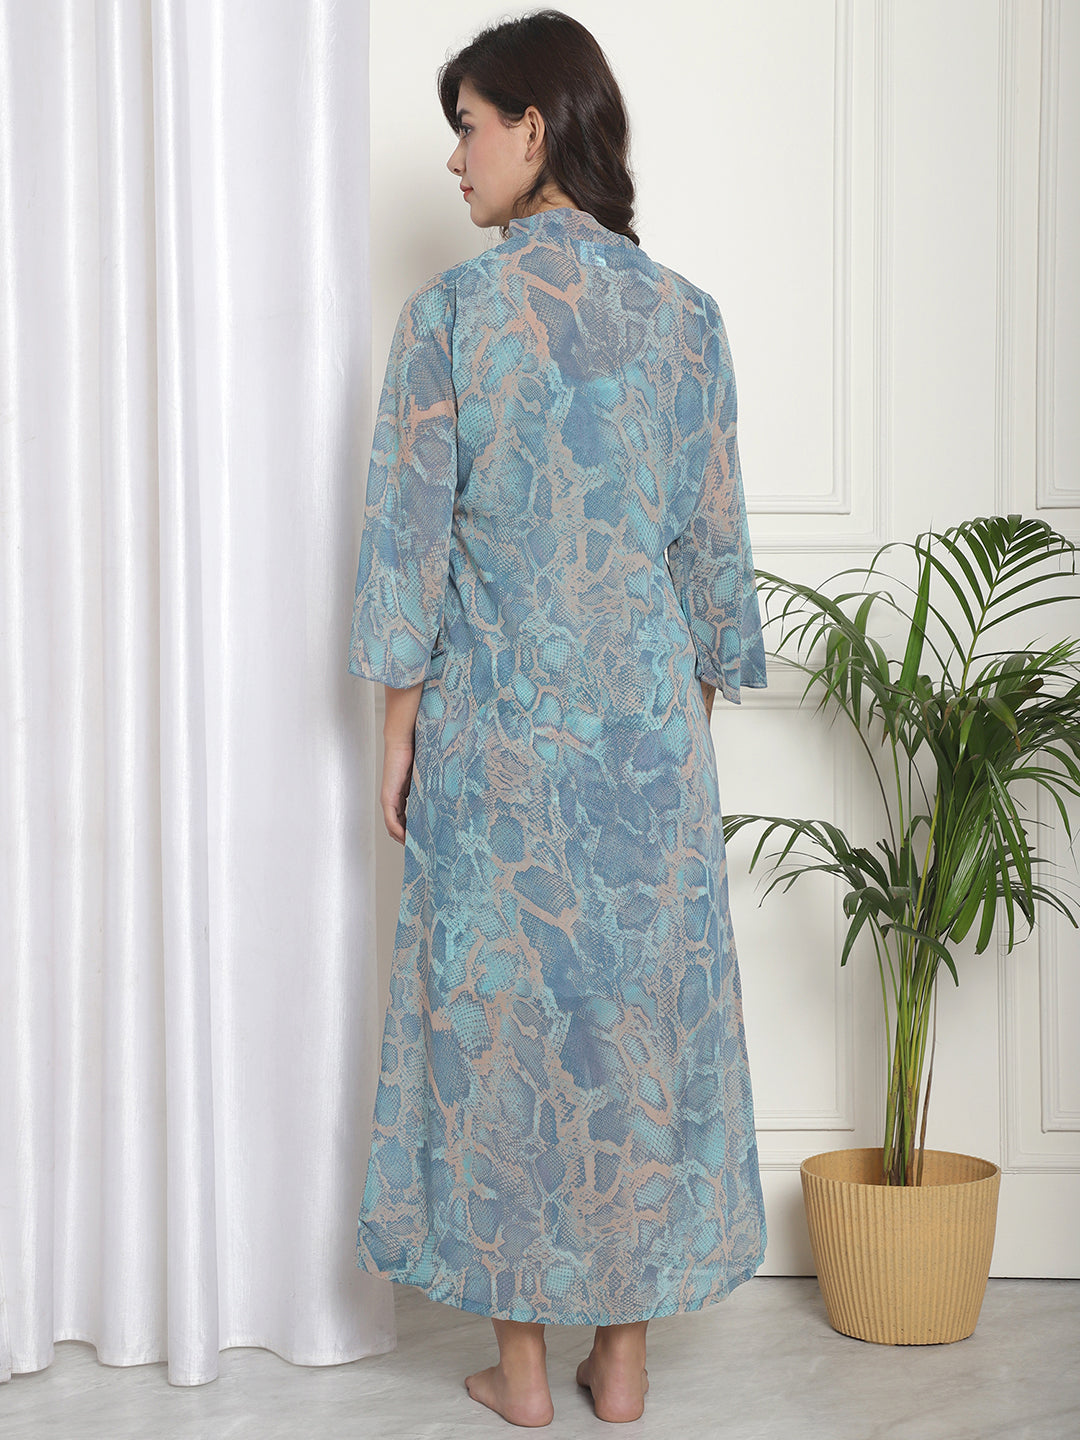 Blue color Abstract Printed Georgette Nightdress With Robe